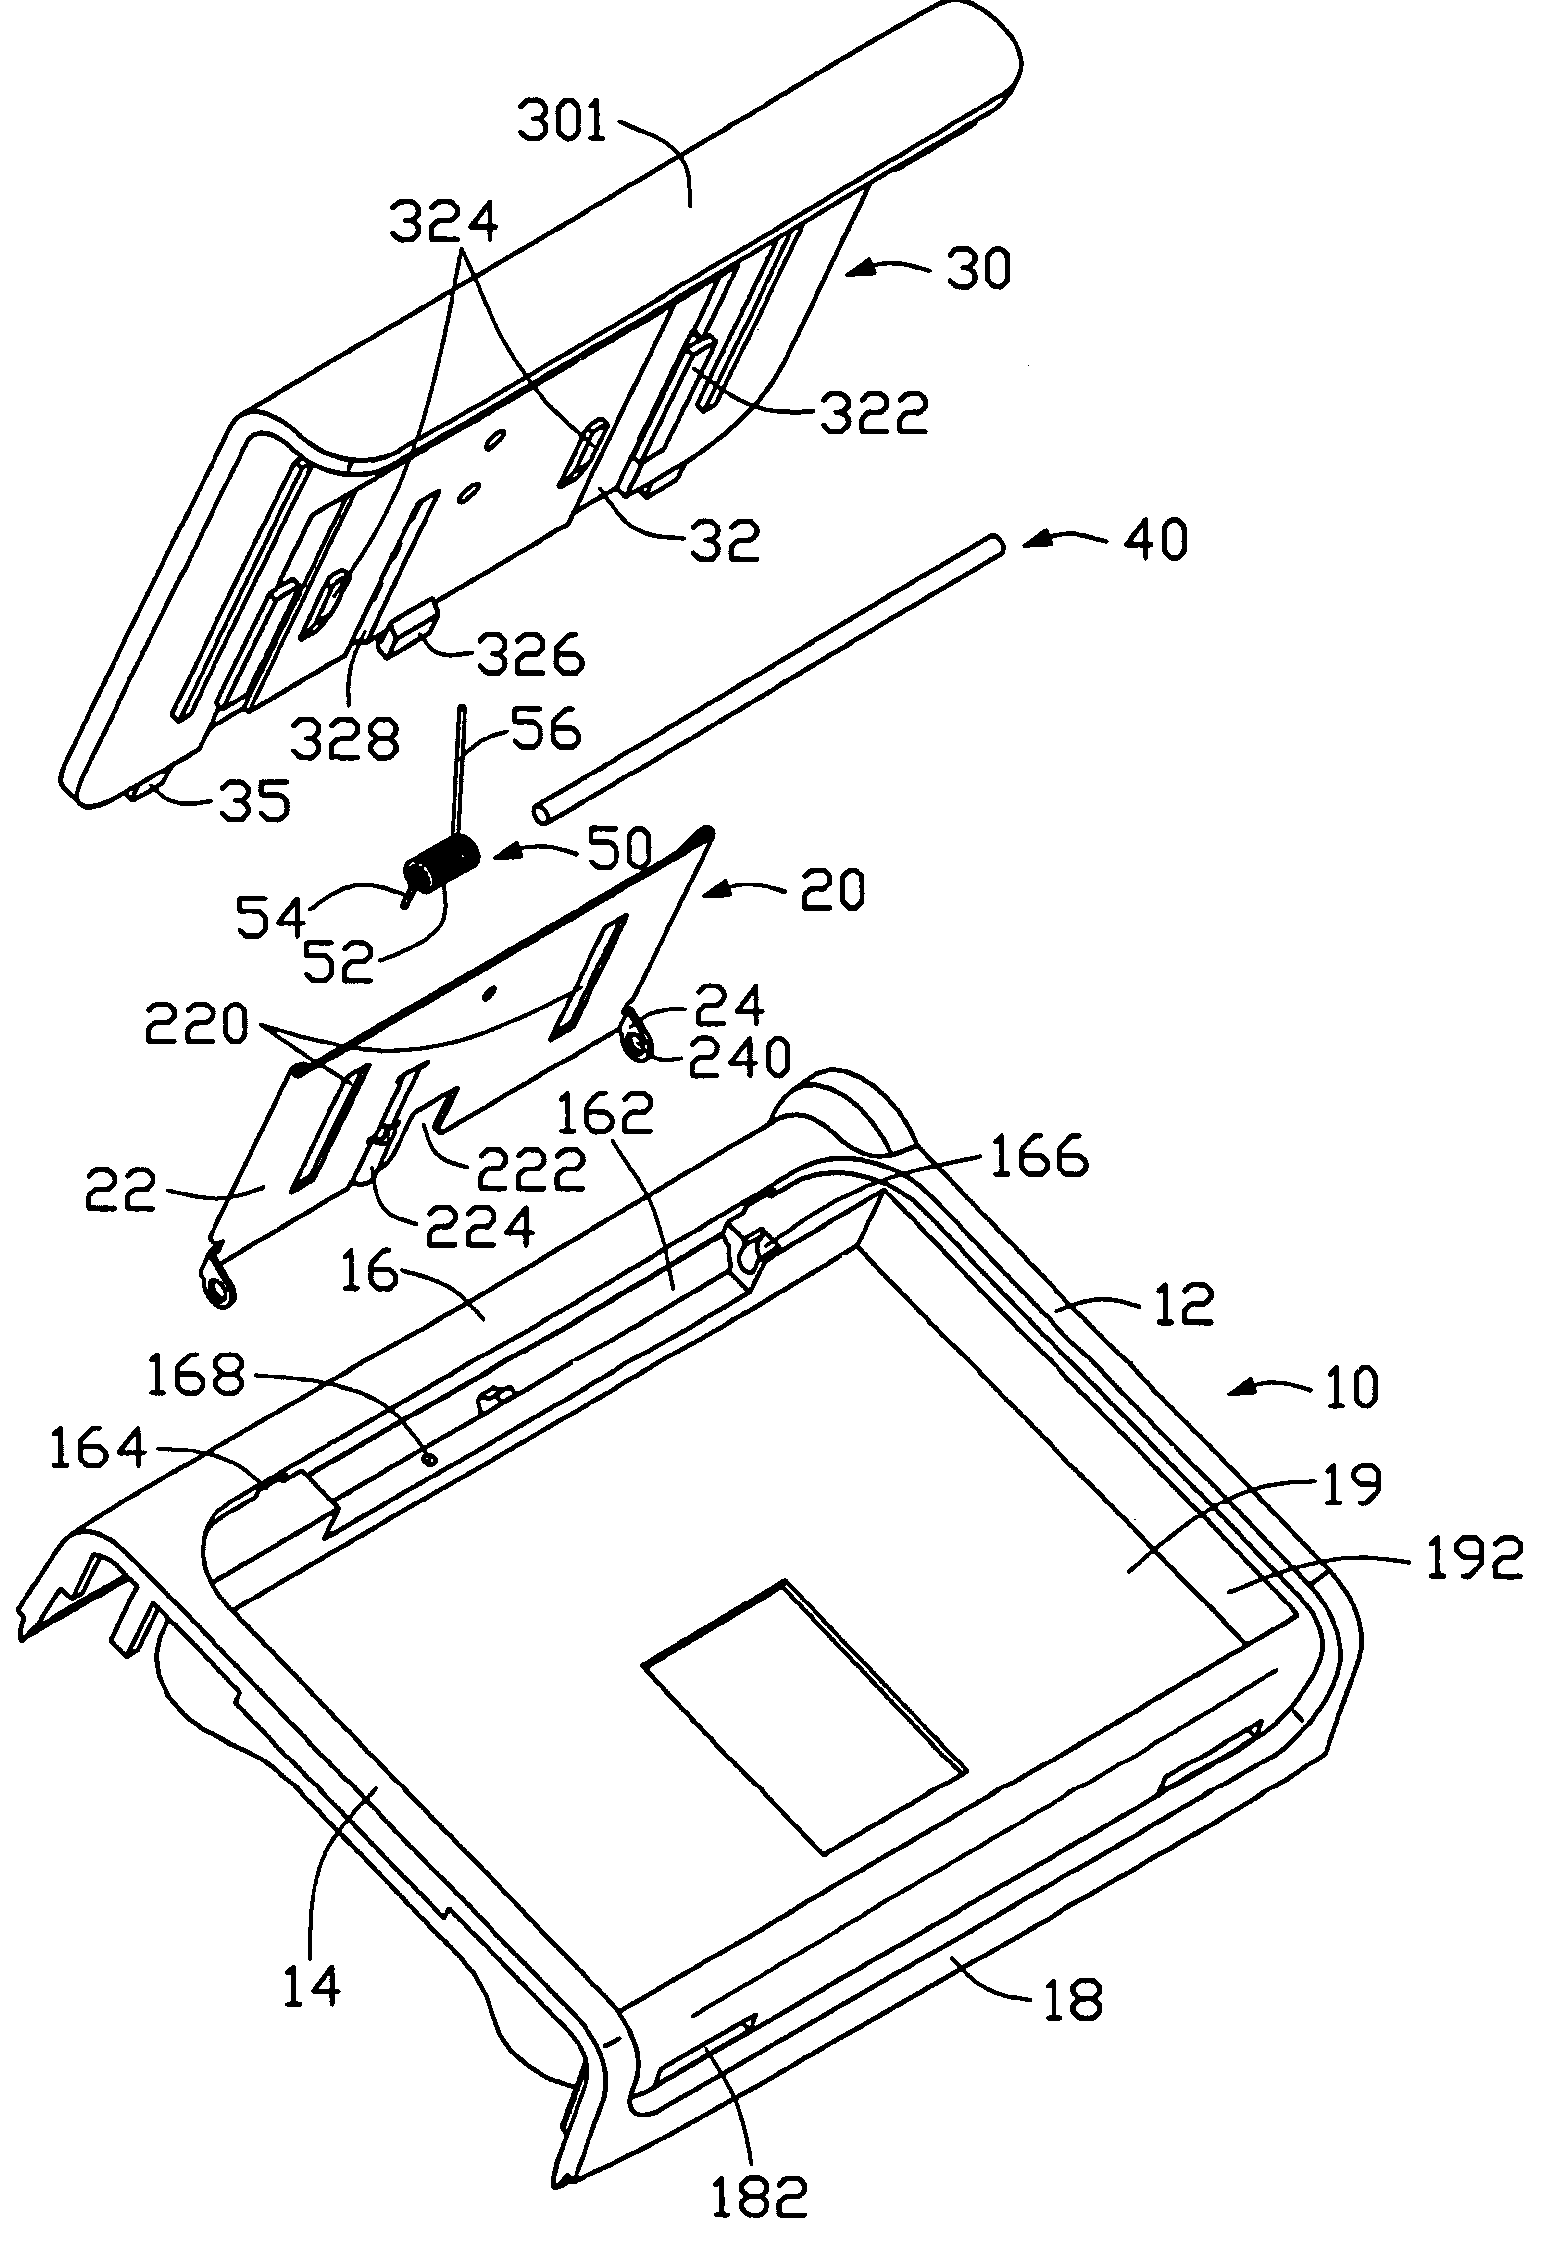 Connecting mechanism for a battery case and a body of a portable electronic device